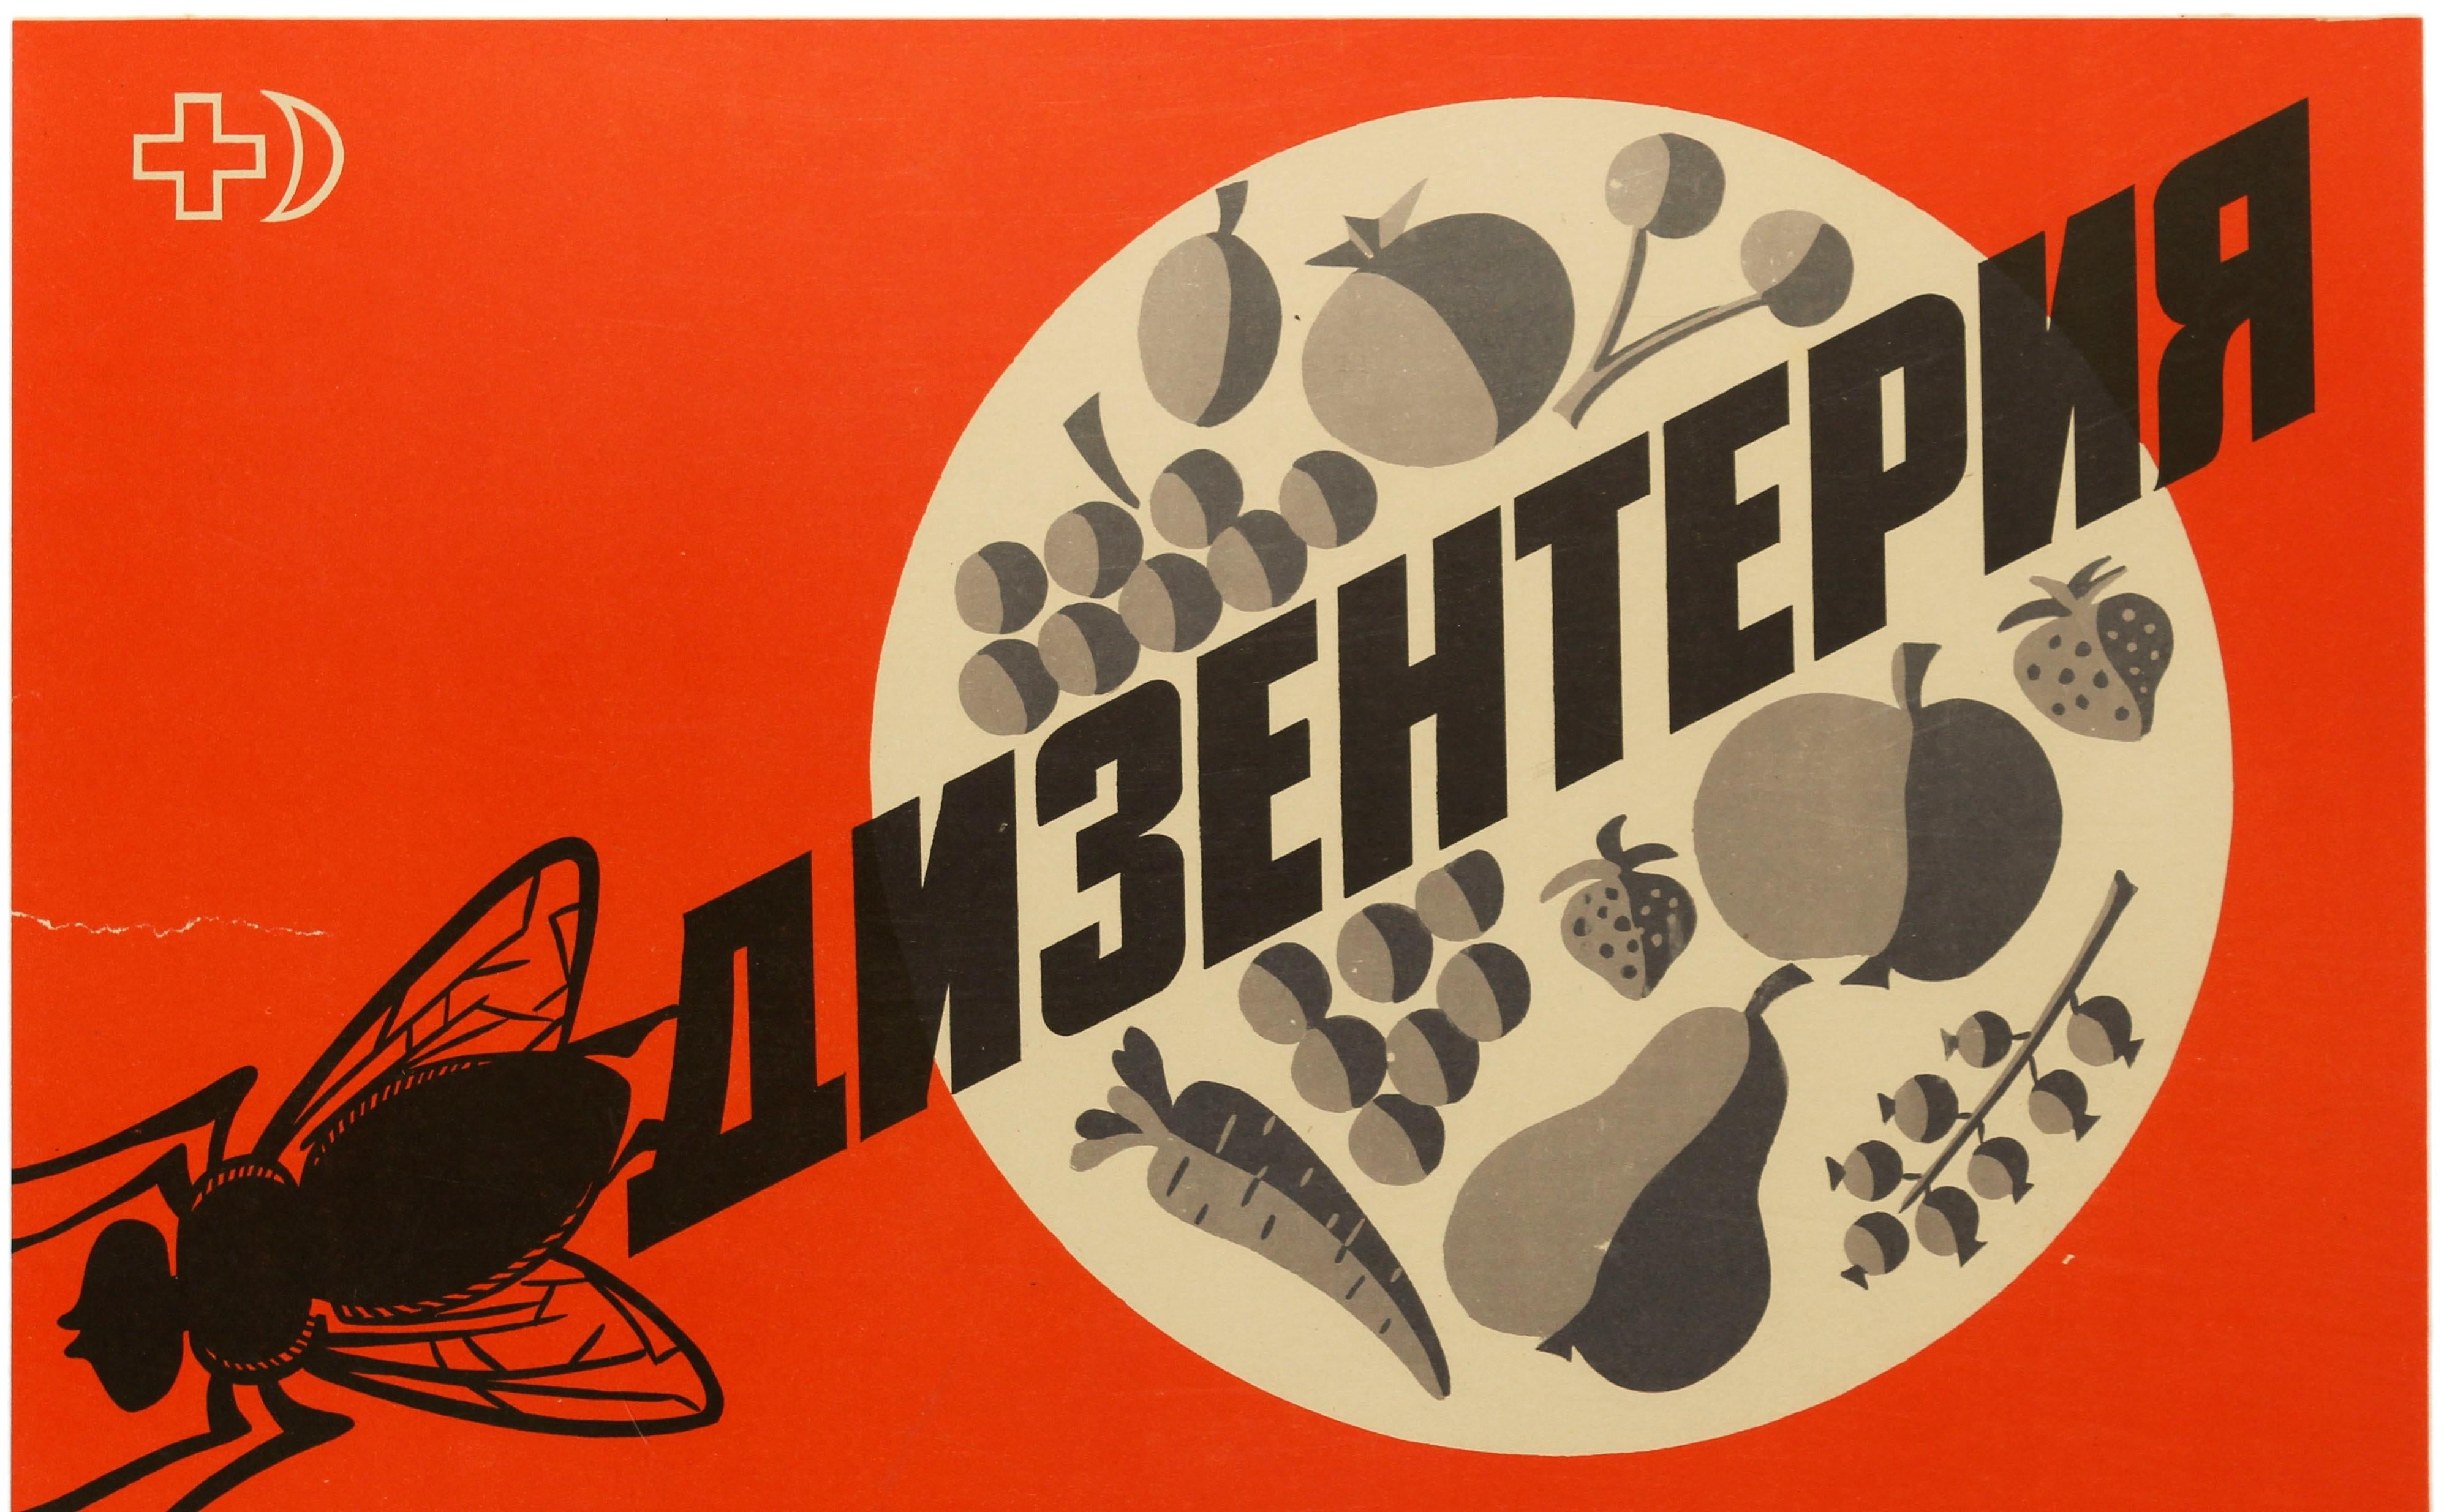 Original vintage Soviet food and health care awareness propaganda poster, Dysentery Flies Kill!, featuring a striking design showing a black fly leaving a trail of disease in the form of the word dysentery in bold letters on a highlighted circle of